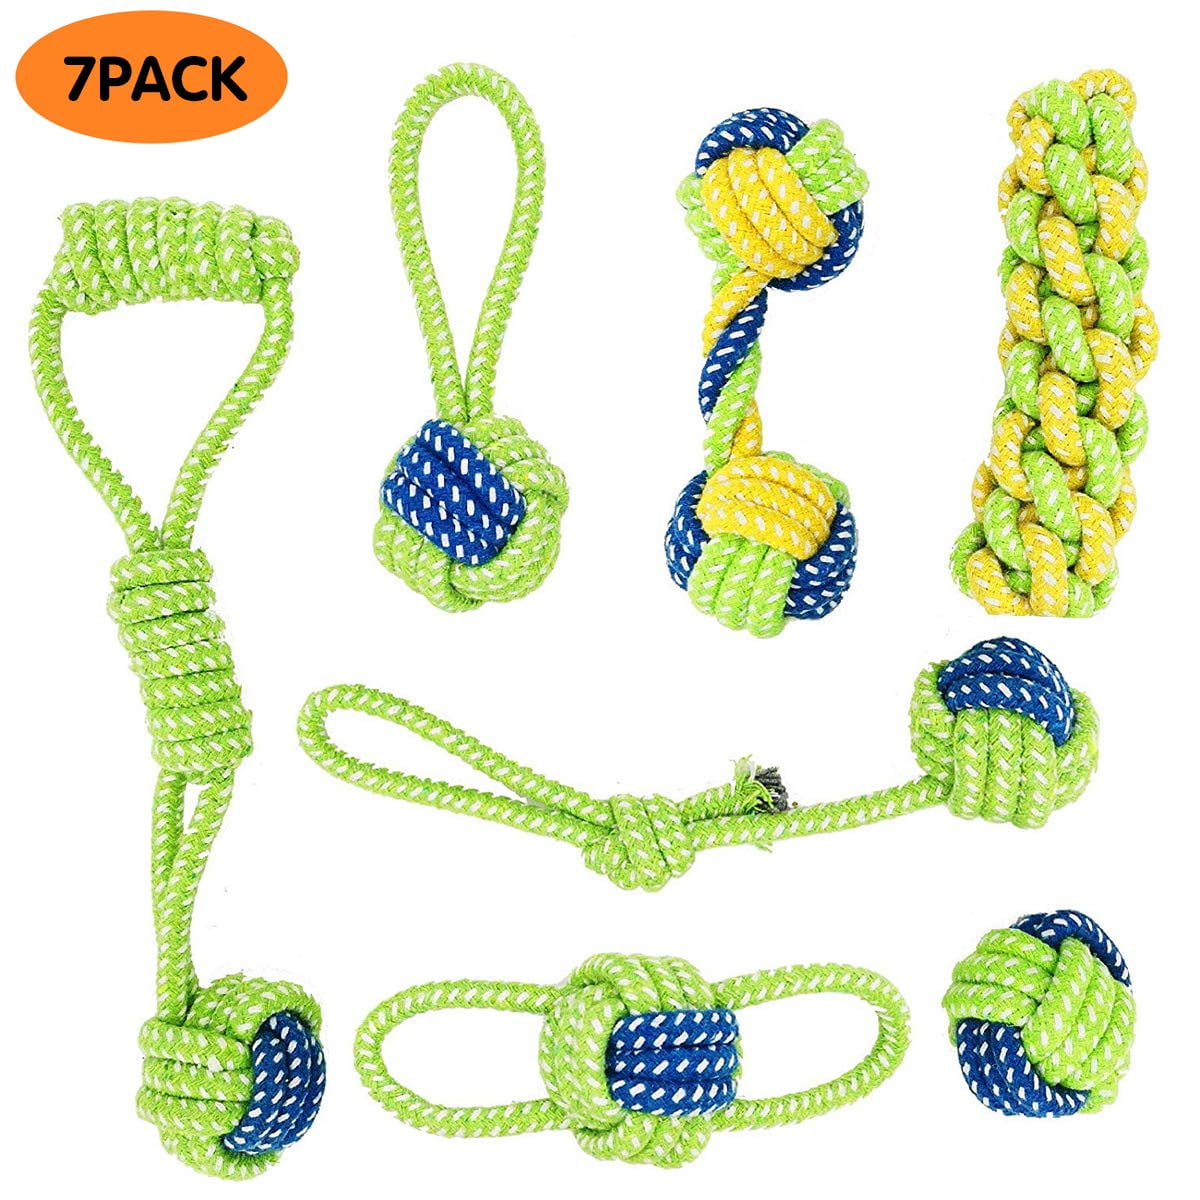 Dog Tug Toy for Exercise and Play Tug of War Dog Toy for Active Dog Outdoor Dog Toys to Keep Them Busy MAVRICFLEX Dog Rope Toy Bungee Rope Interactive Dog Toys Fit Large and Medium Dogs 